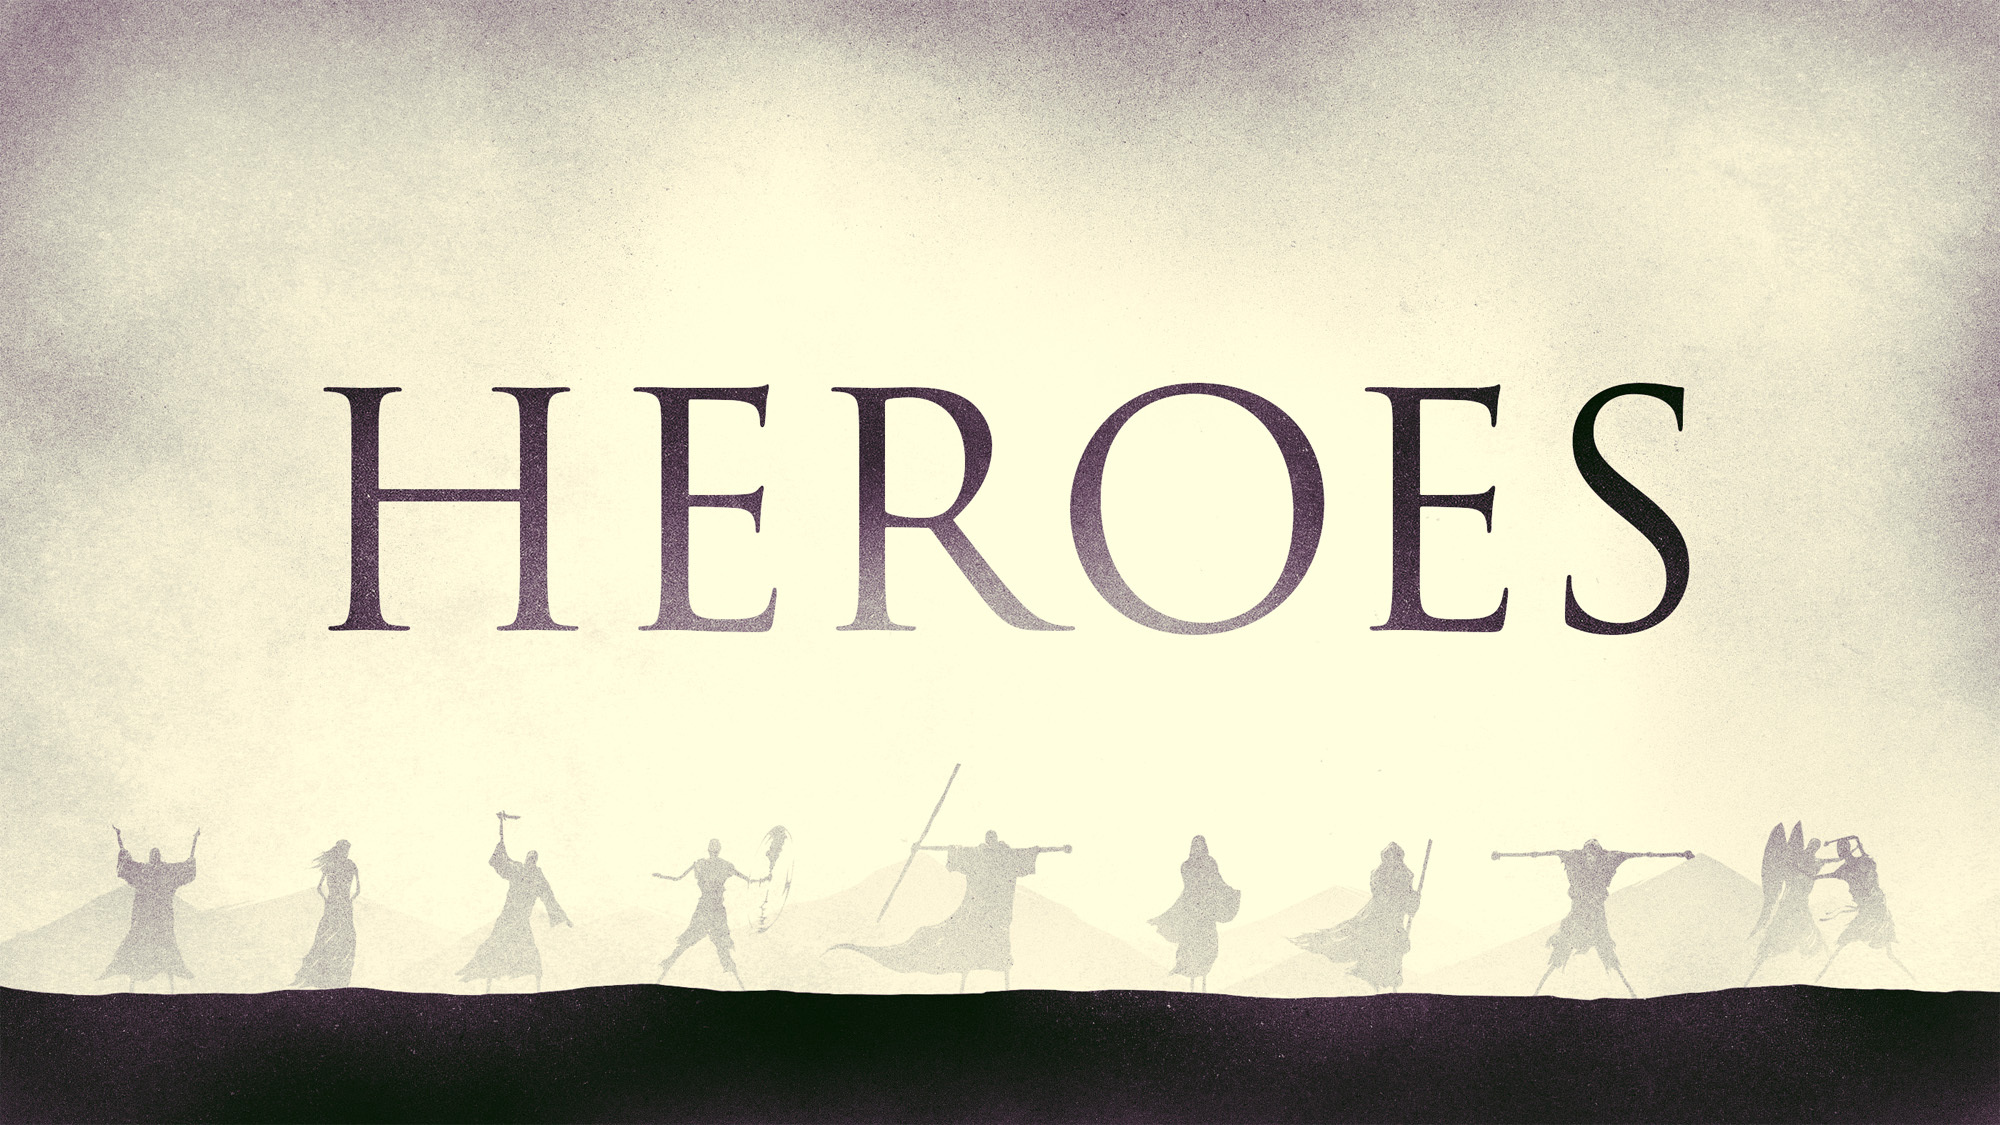 Heroes - Esther